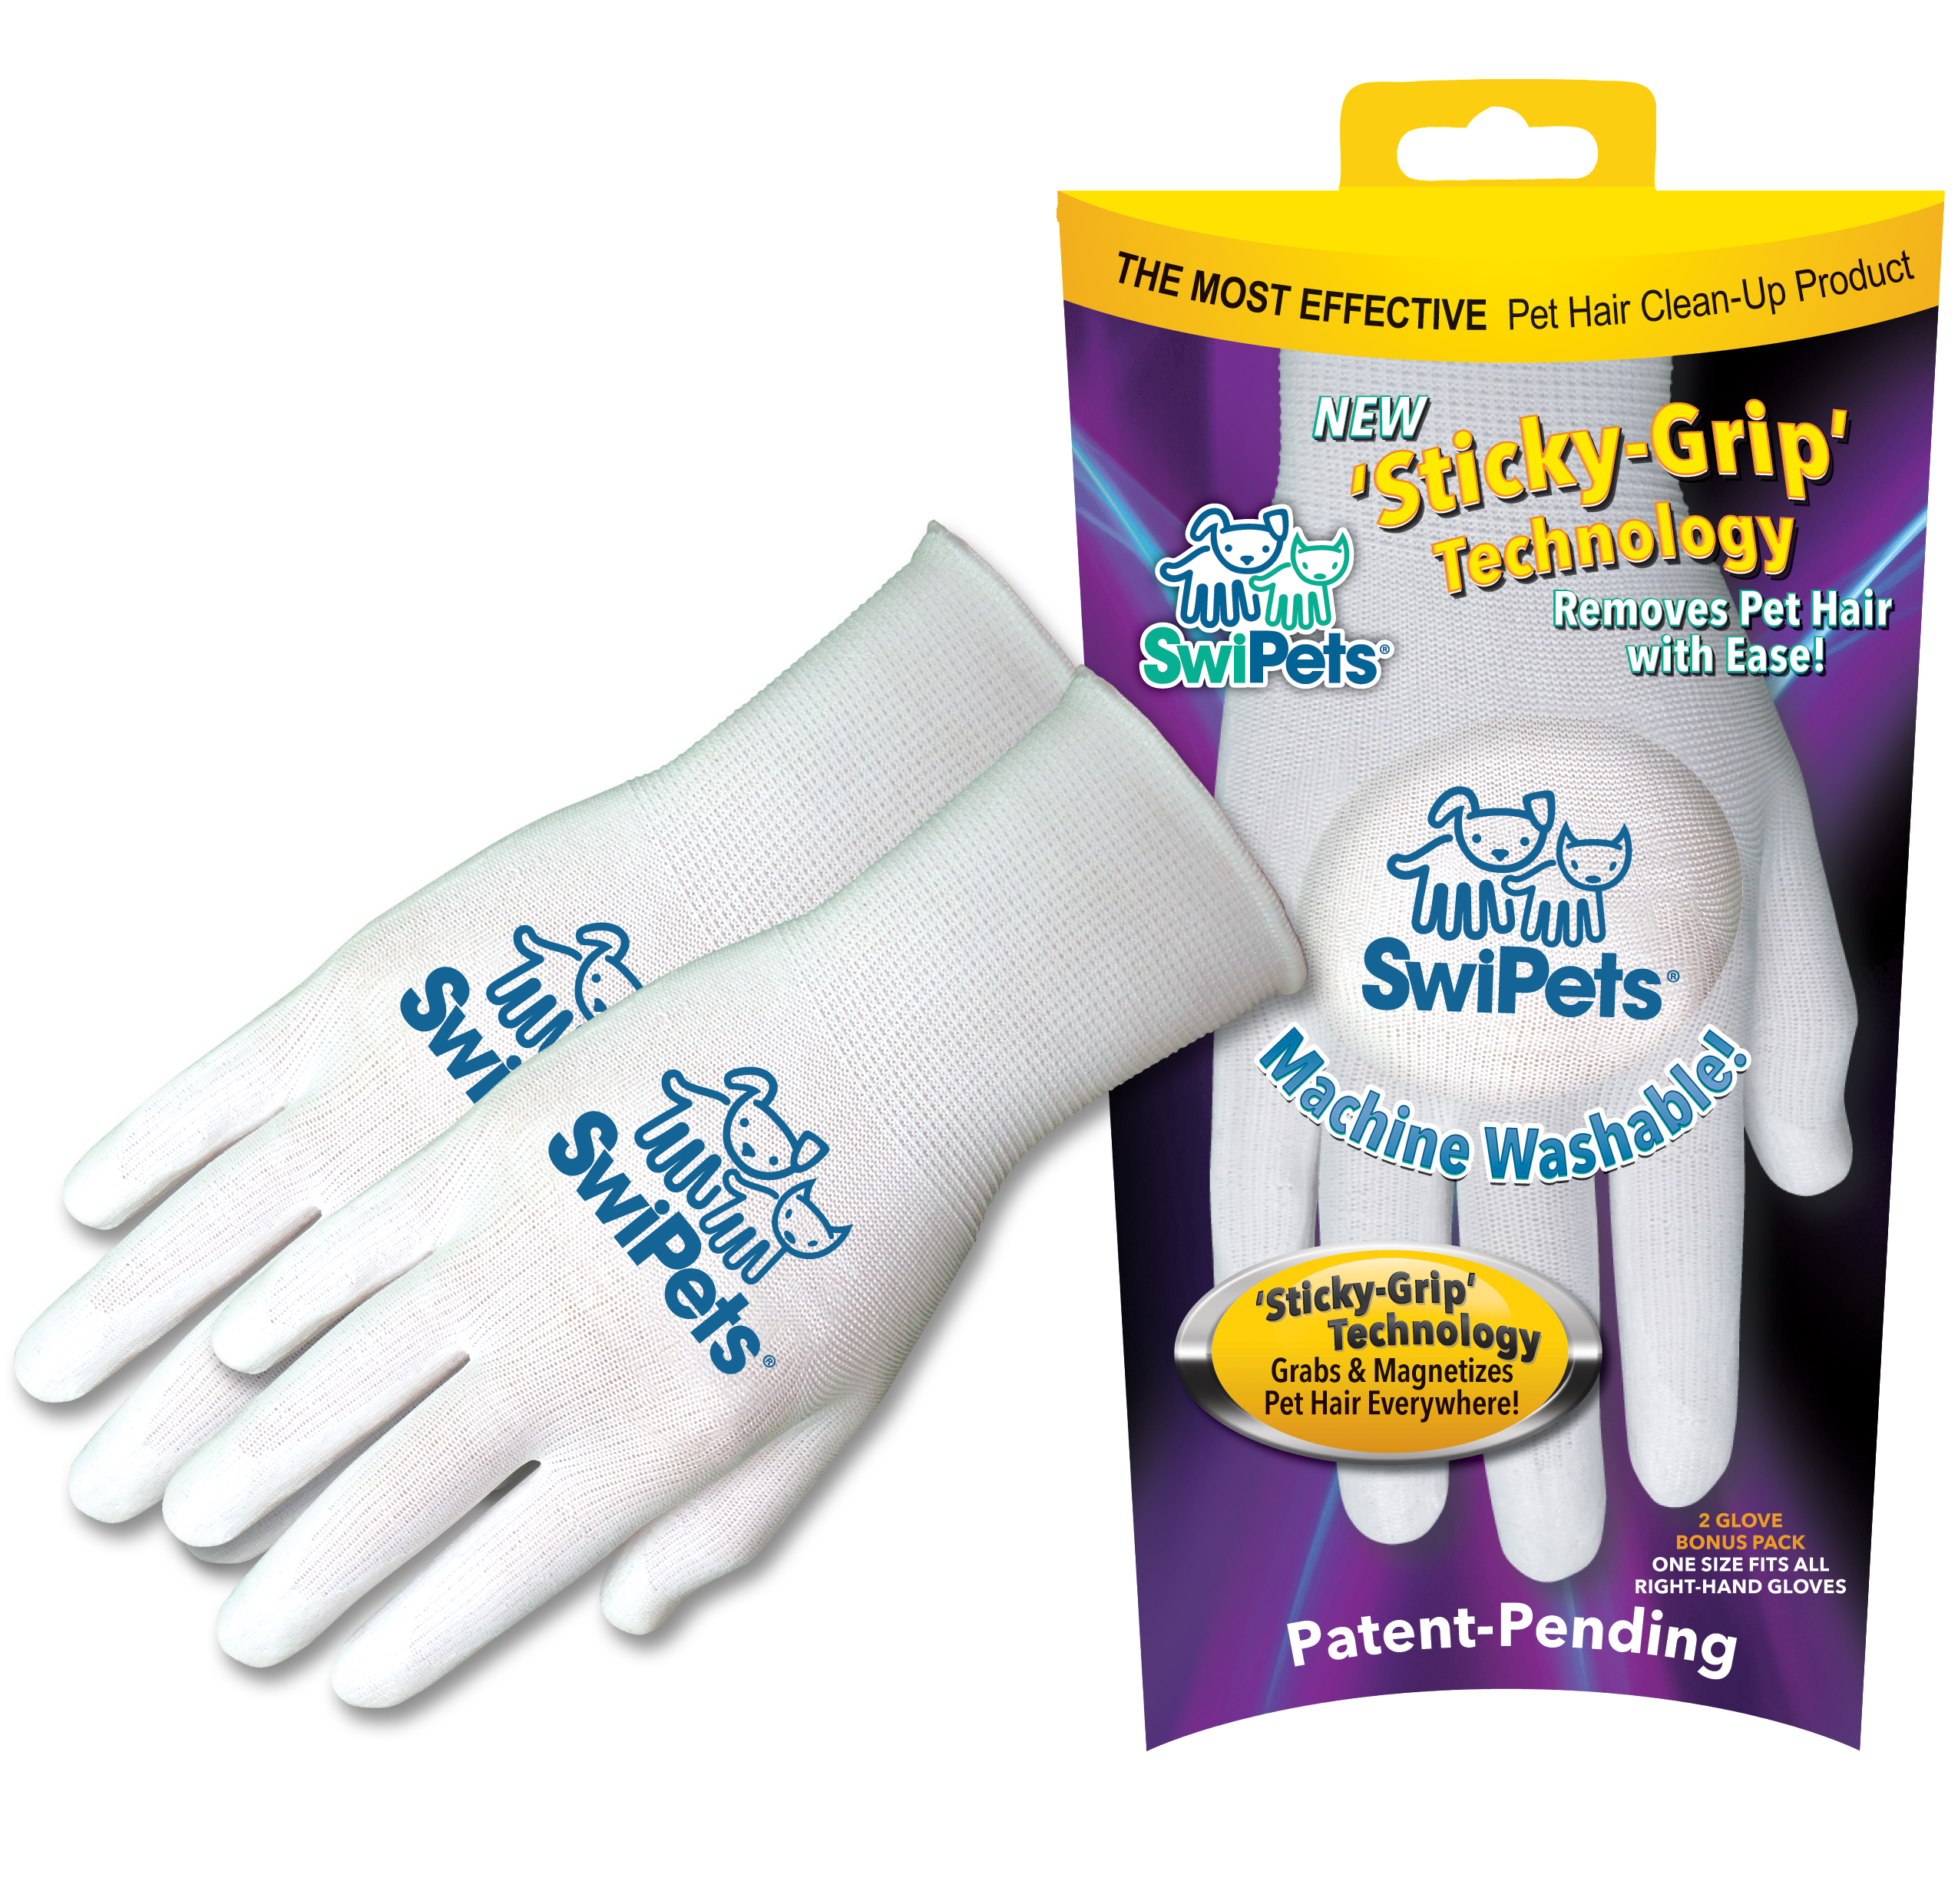 Win a Double-Pack of SwiPets Pet Hair Cleaning Glove!